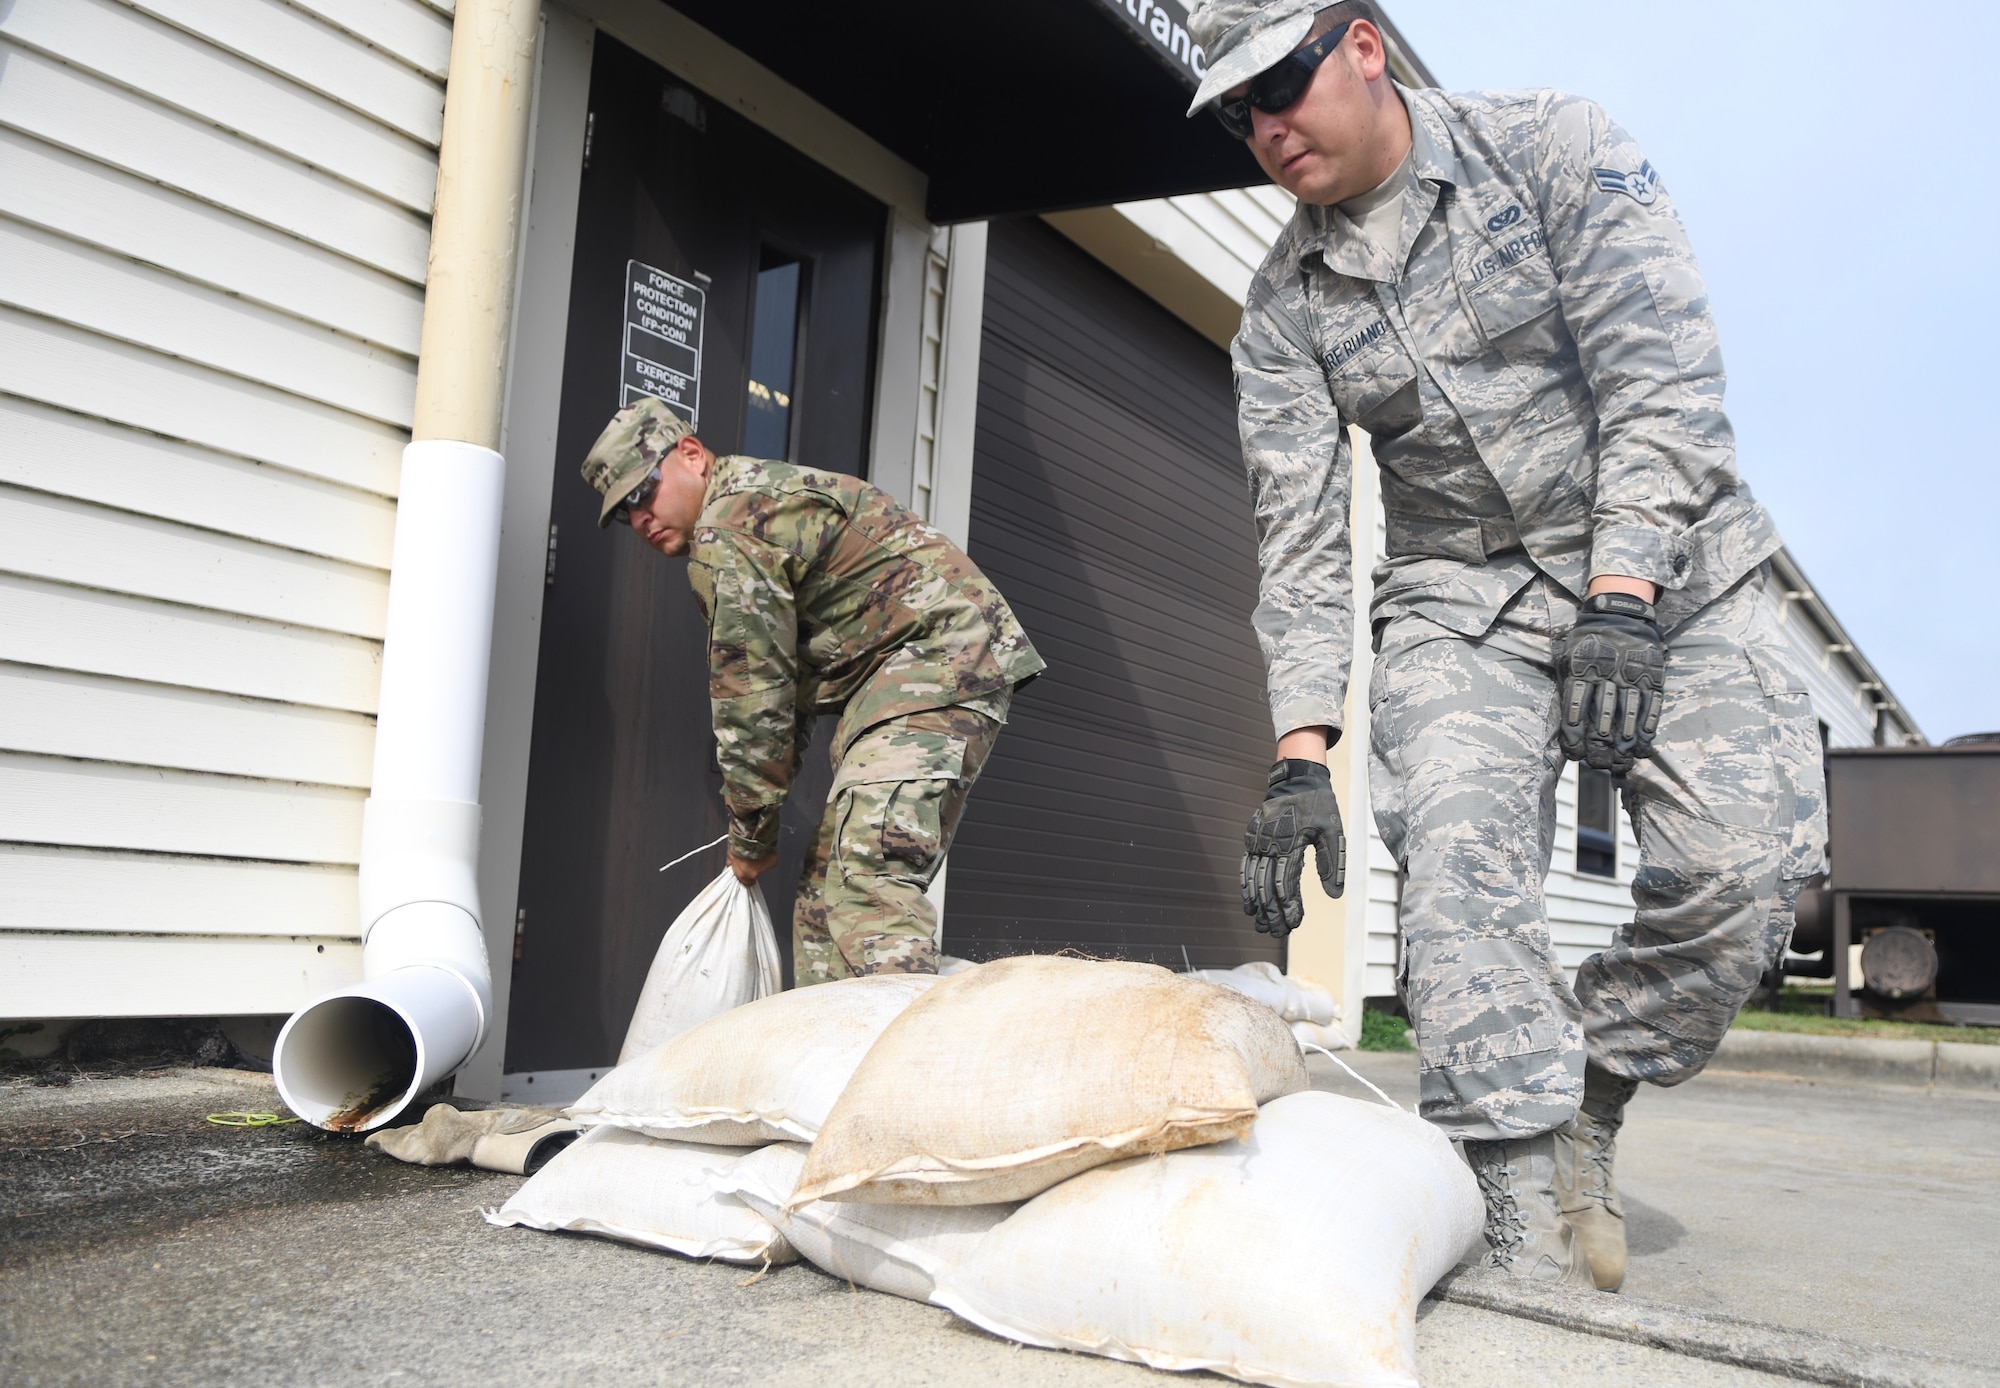 Seymour Johnson Air Force Base, N.C. — SSgt Manuel Acuna and Airman 1st Class Torre Ruano, 4th Civil Engineer Squadron pavement and production specialists, stack sand bags Sept. 4, 2019, at Seymour Johnson Air Force Base, North Carolina in front of th 4th CE headquarters building. The 4th CES, to include equipment operators, electricians, plumbers, structural craftsman, heating, ventilation and air conditioning, and production technicians, are providing 24-hour response and recovery operations during and following Hurricane Dorian. (U.S. Air Force photo by Staff Sgt. Michael Charles)